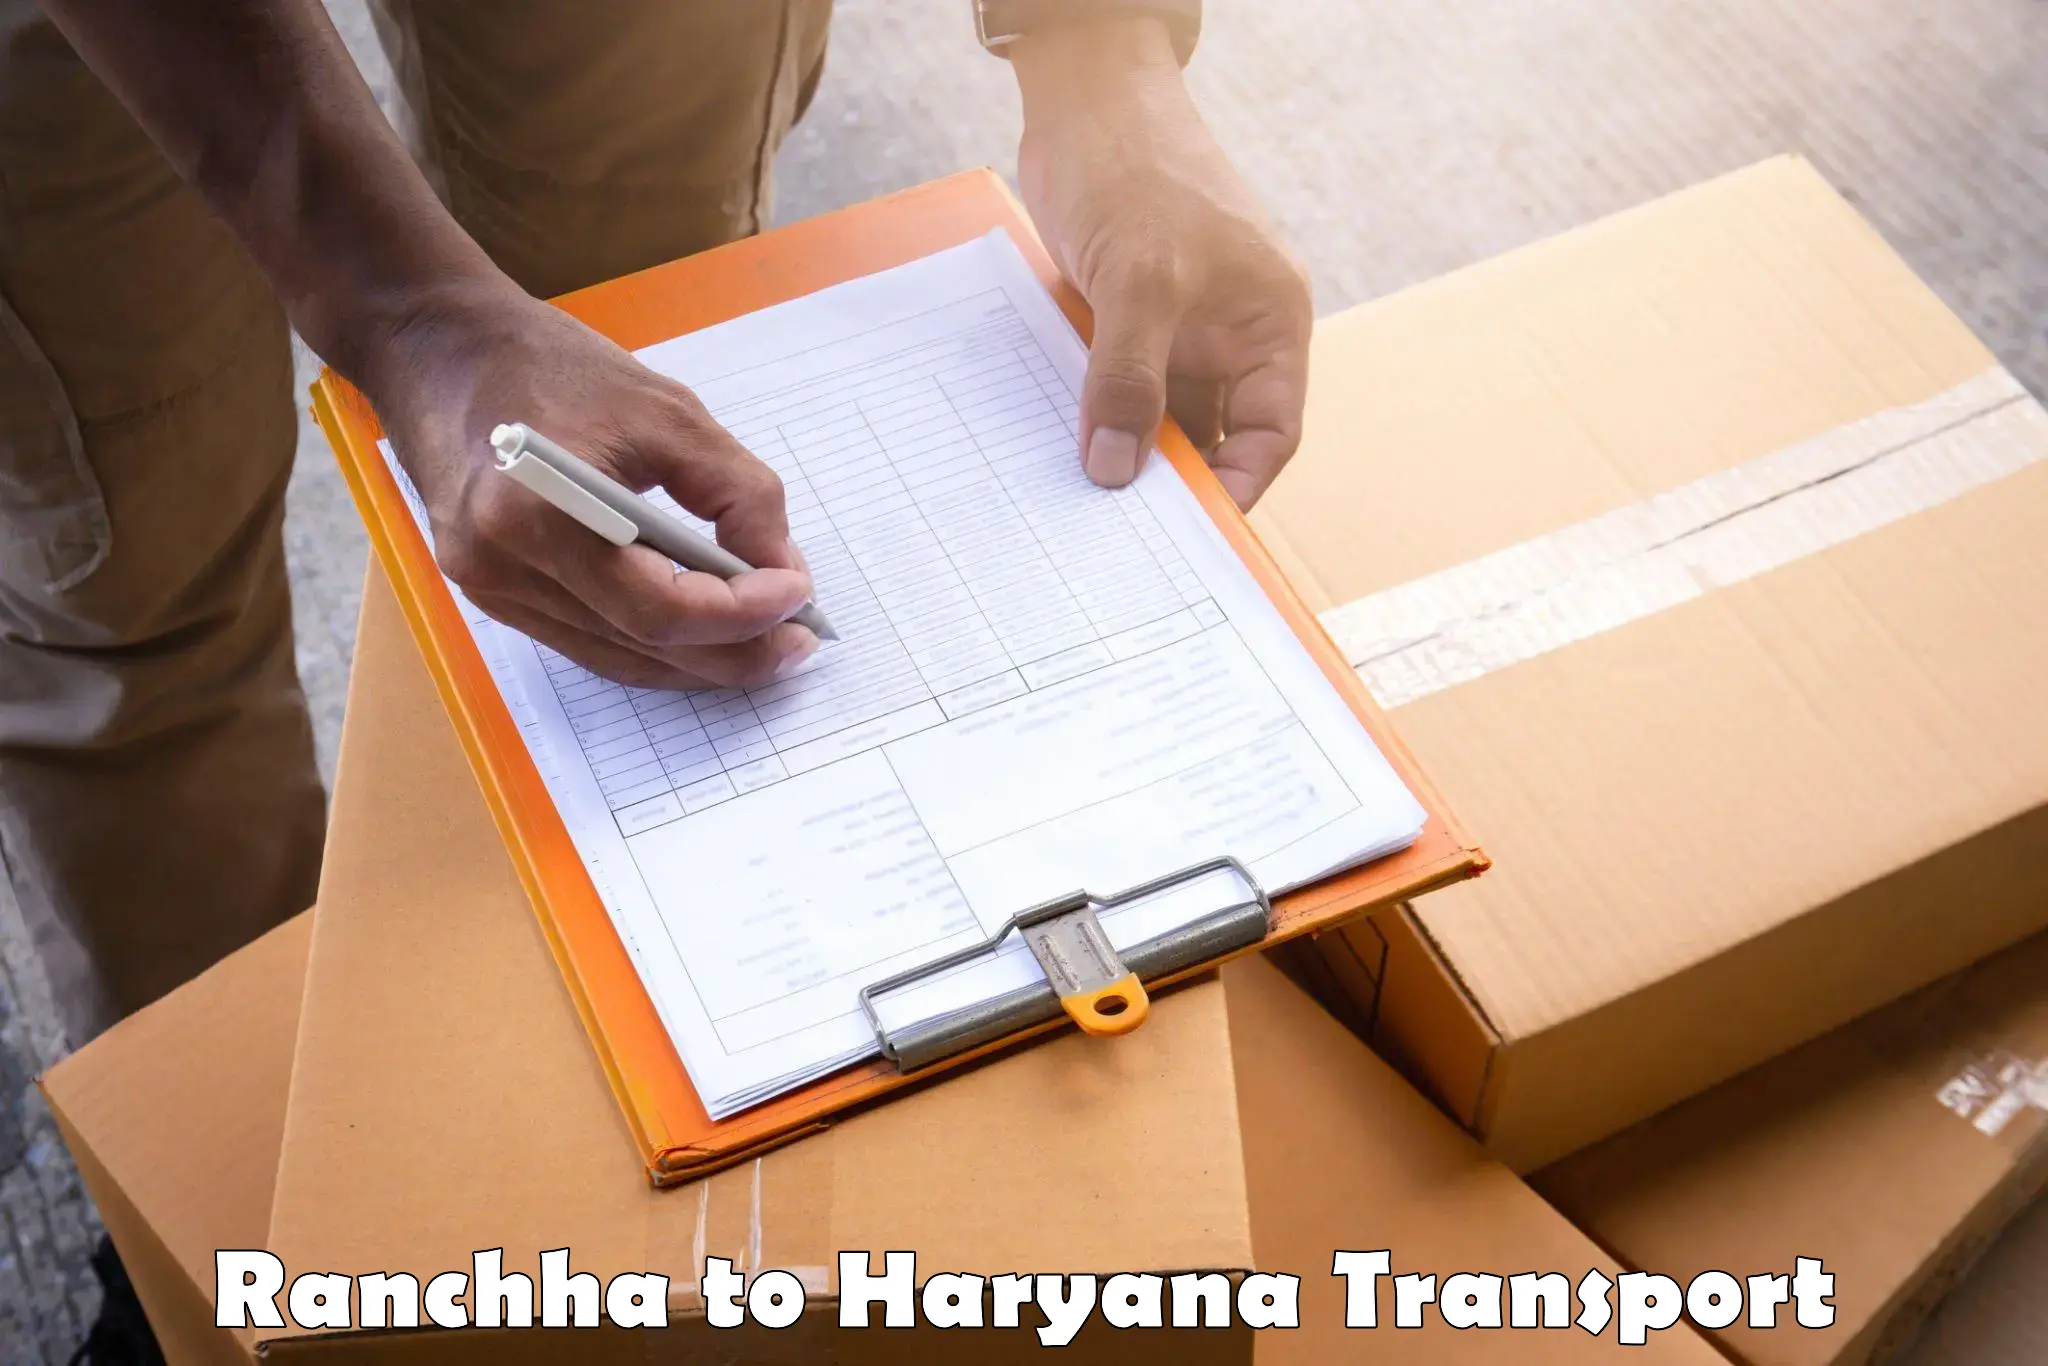 Part load transport service in India Ranchha to Gurgaon